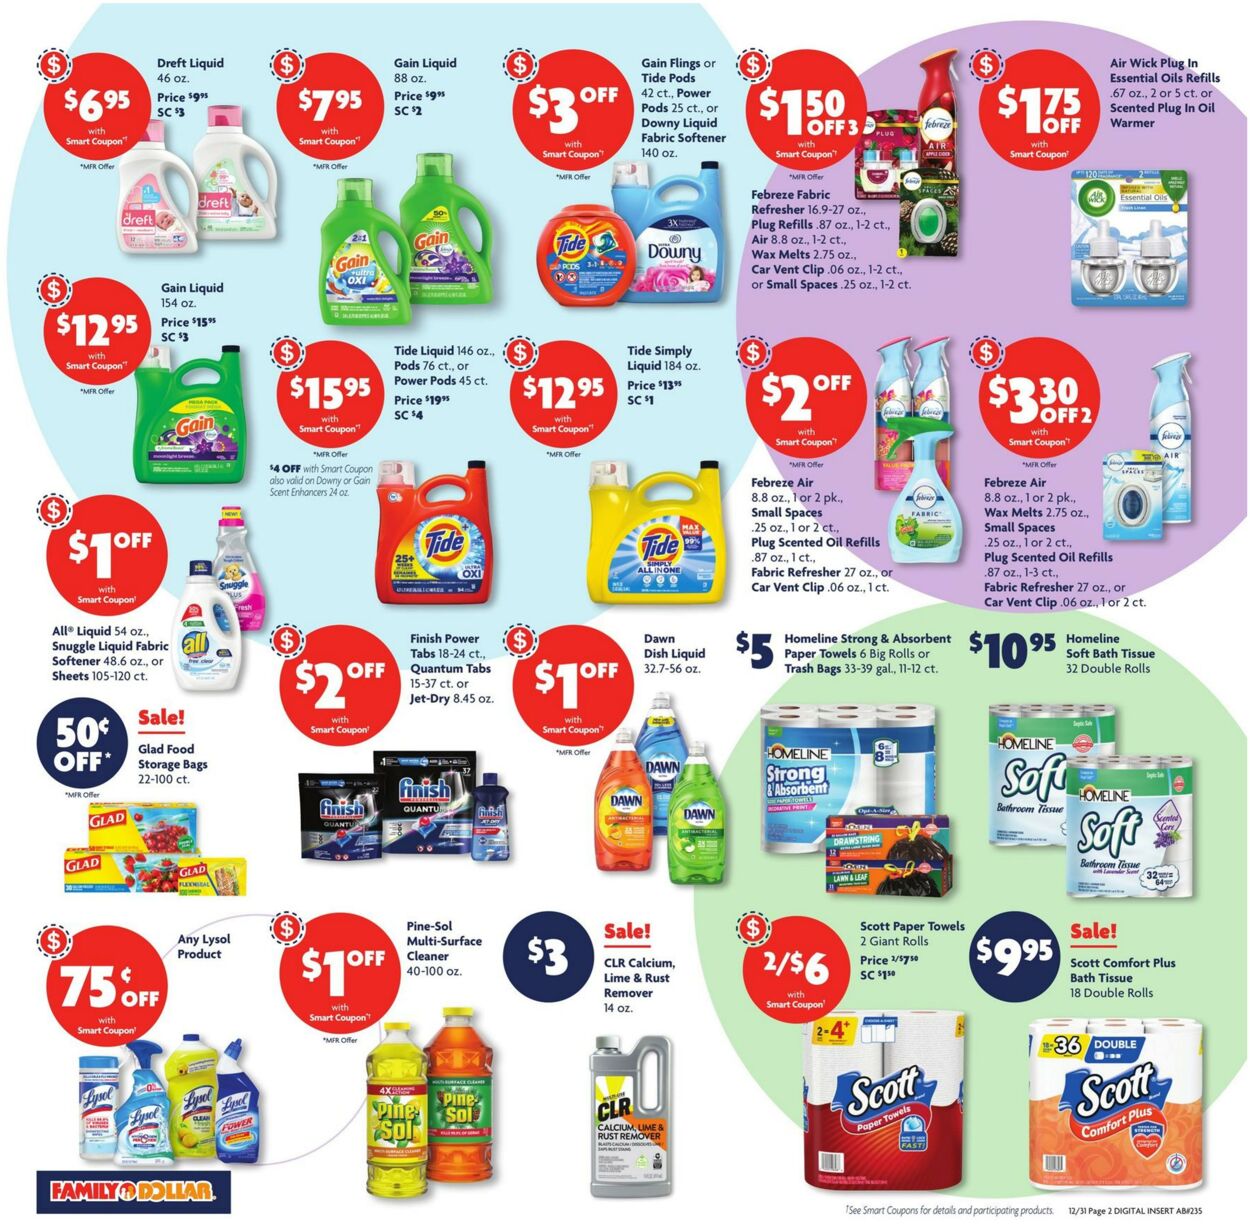 Family Dollar Ad from 12/31/2023